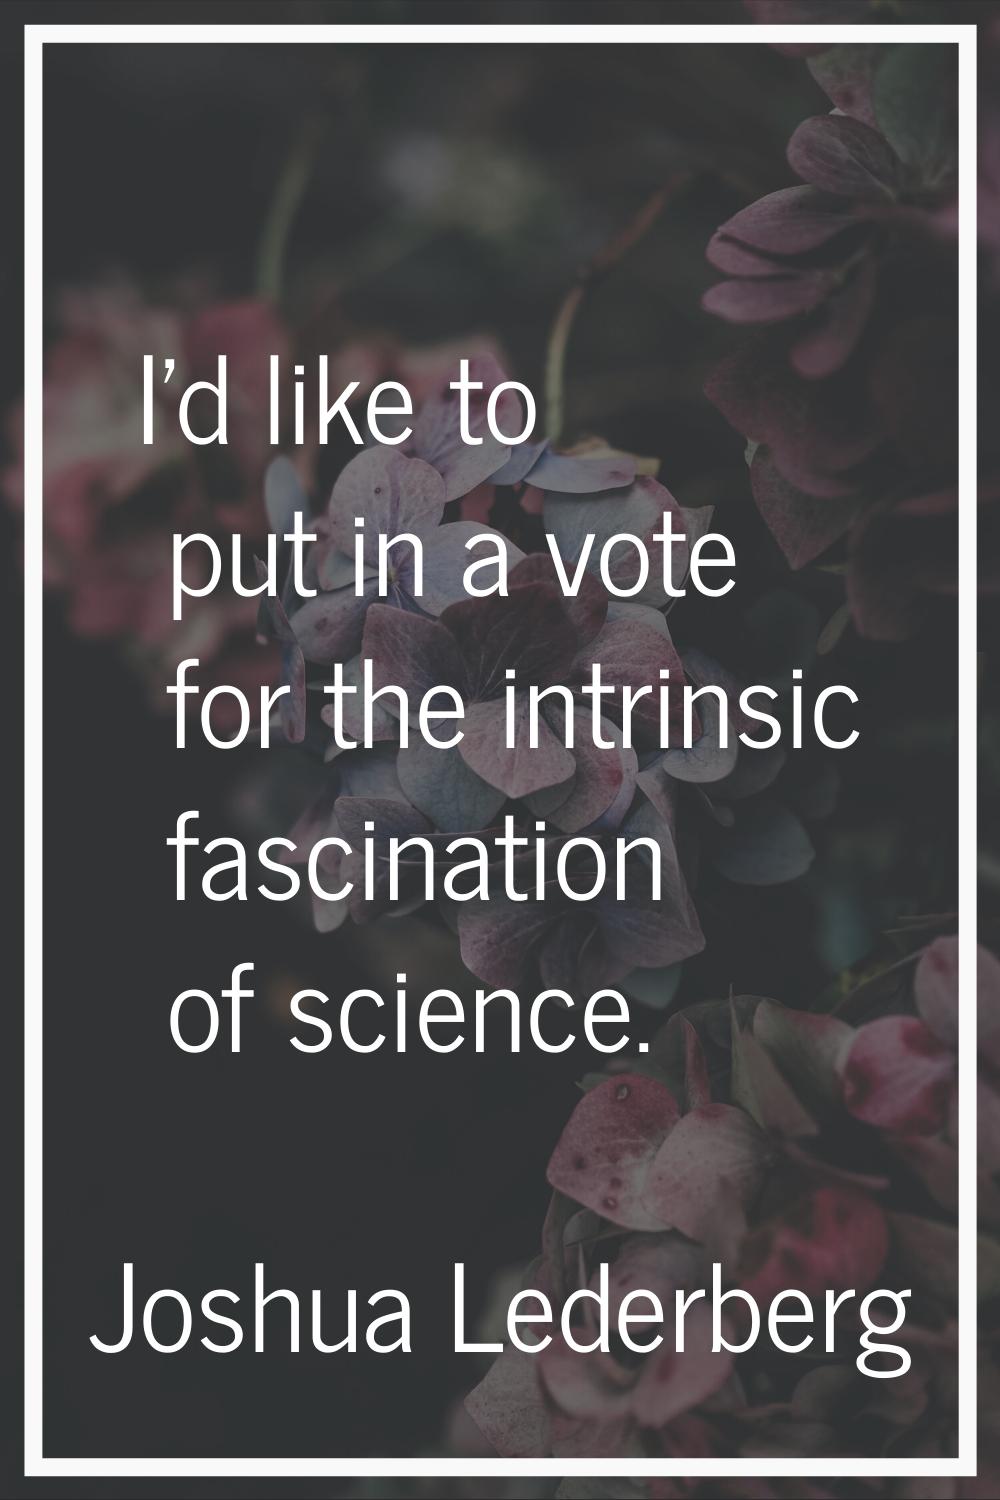 I'd like to put in a vote for the intrinsic fascination of science.